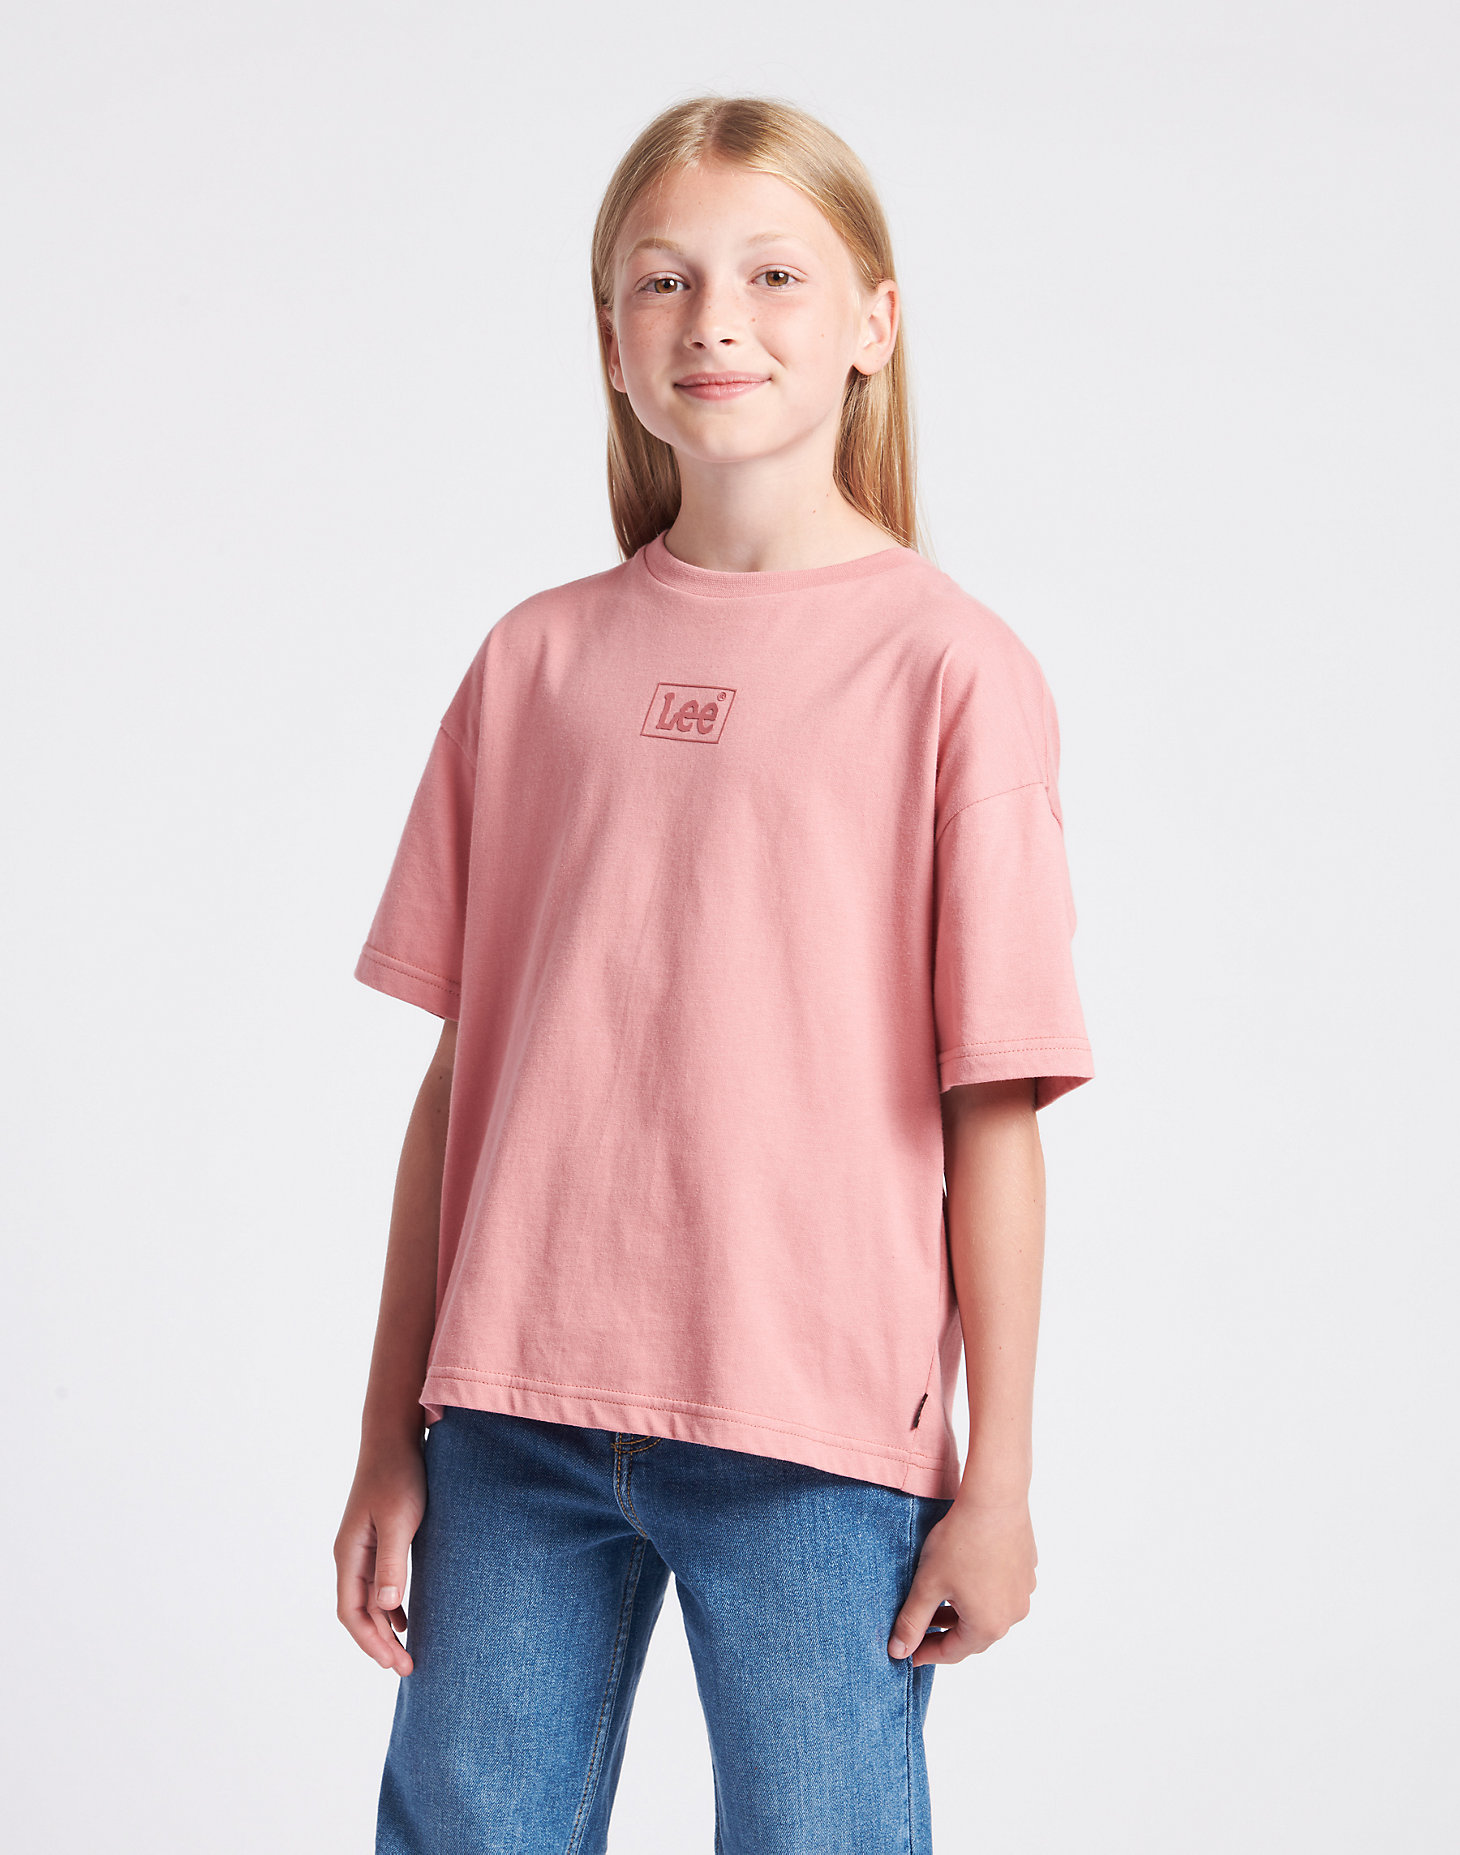 Small Graphic Tee in Dusty Rose alternative view 1